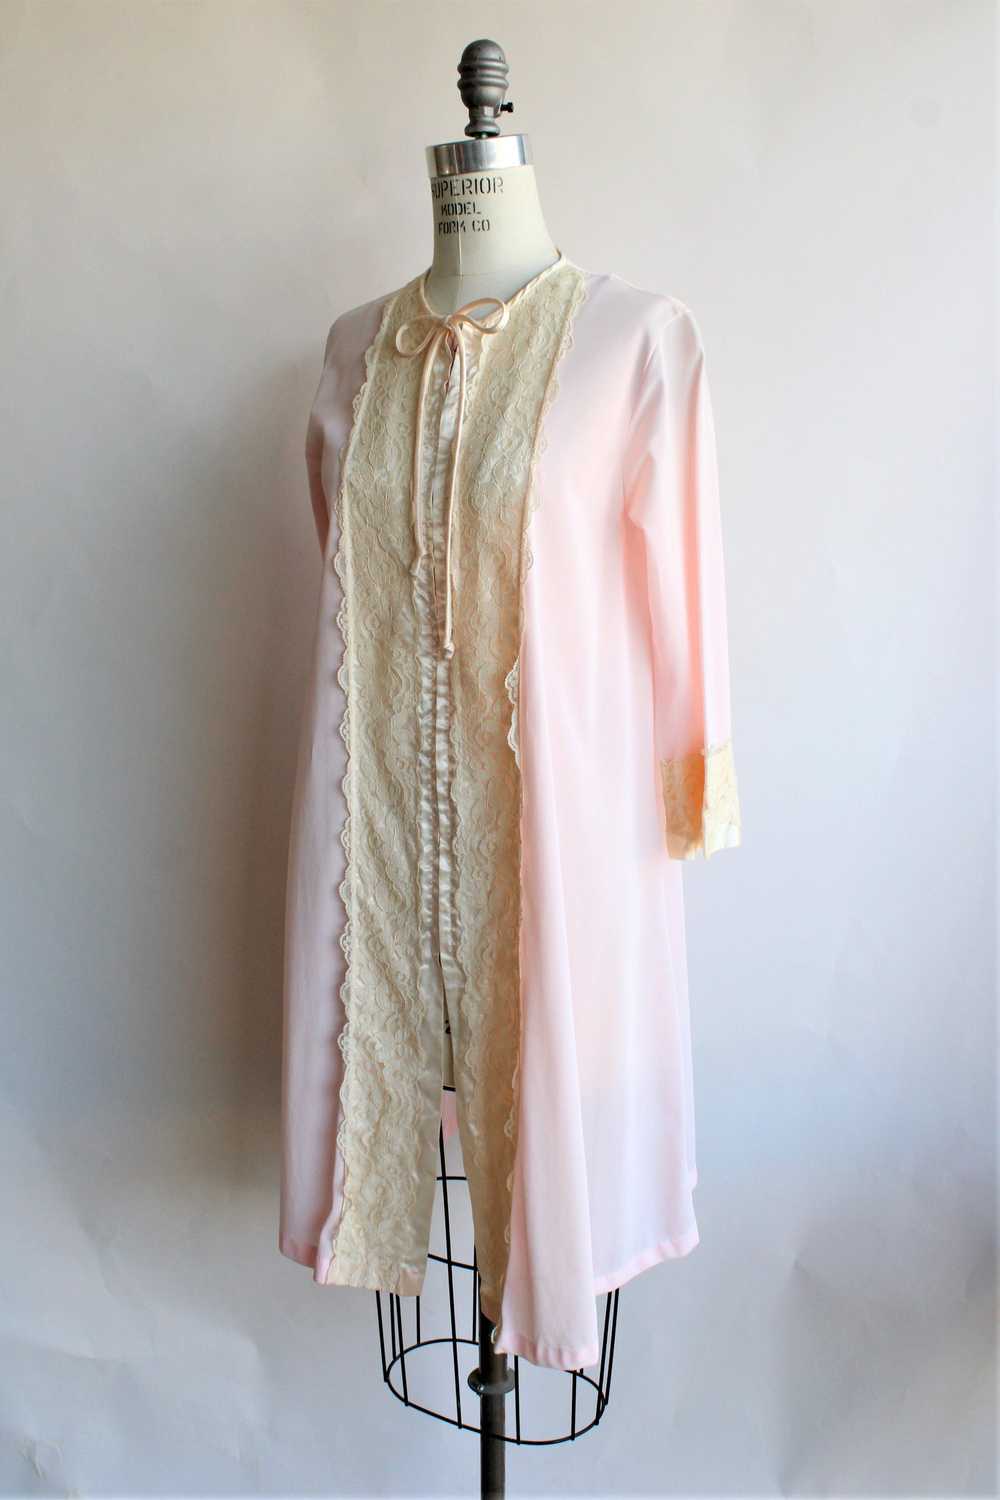 Vintage 1970s Gilead Pink And Lace Nylon Robe wit… - image 5